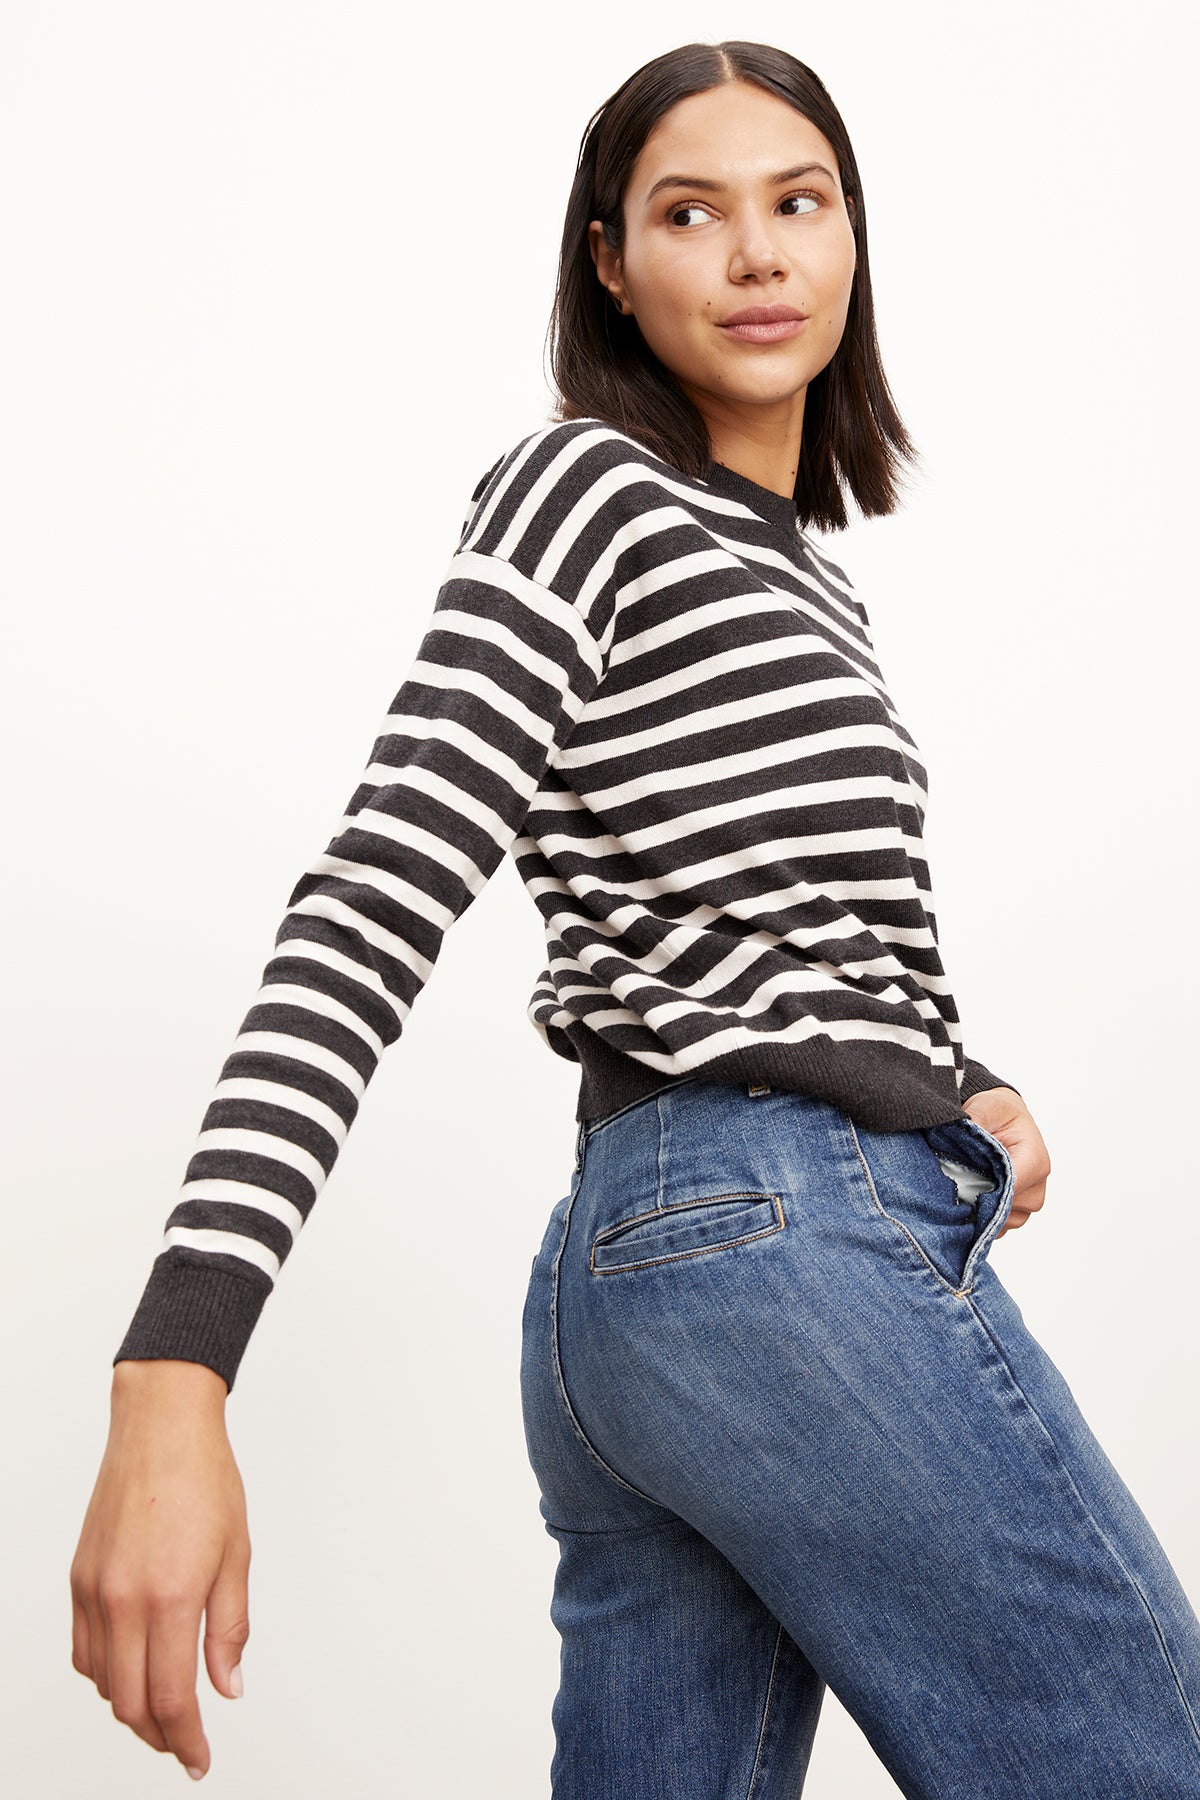 A woman wearing an ALISTER STRIPED CREW NECK SWEATER by Velvet by Graham & Spencer and jeans.-26799864807617